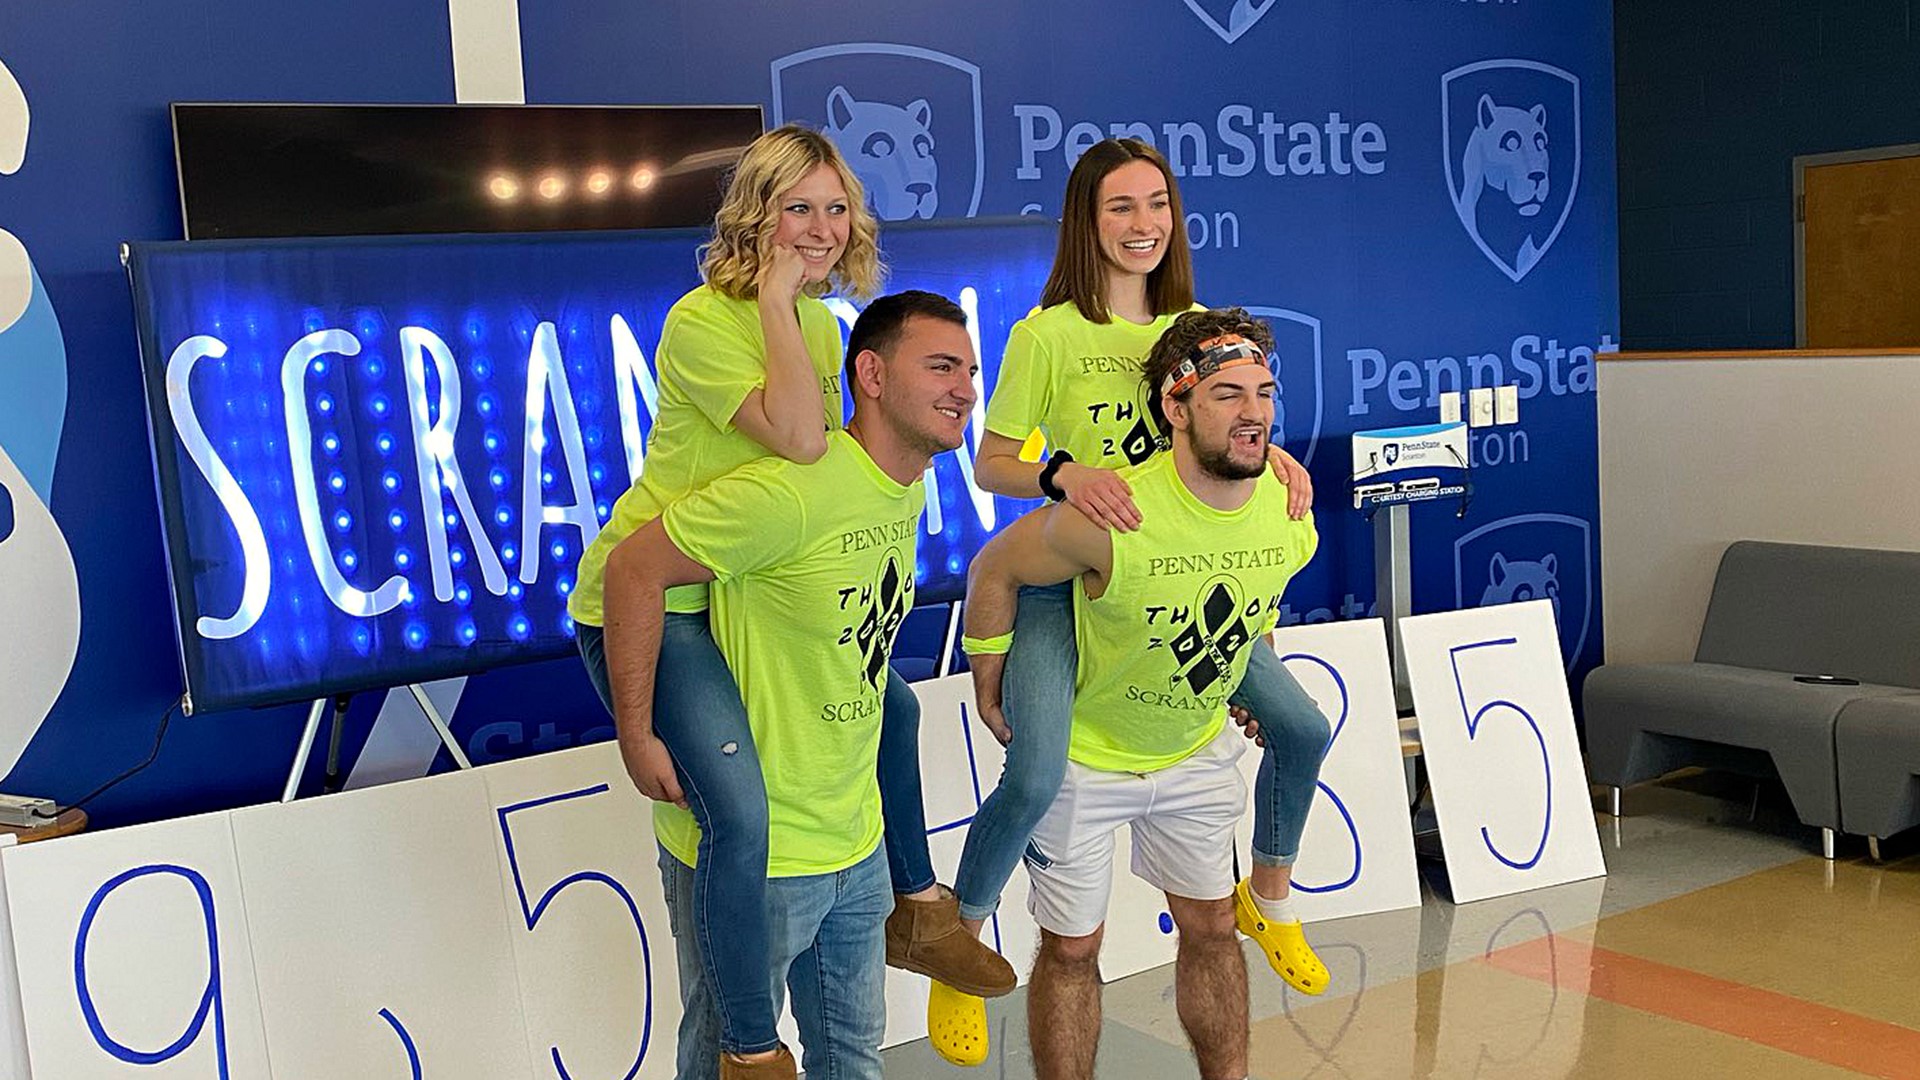 Starting Friday night, hundreds of Penn State students will get on their feet and stay there for 46 hours to fight childhood cancer.